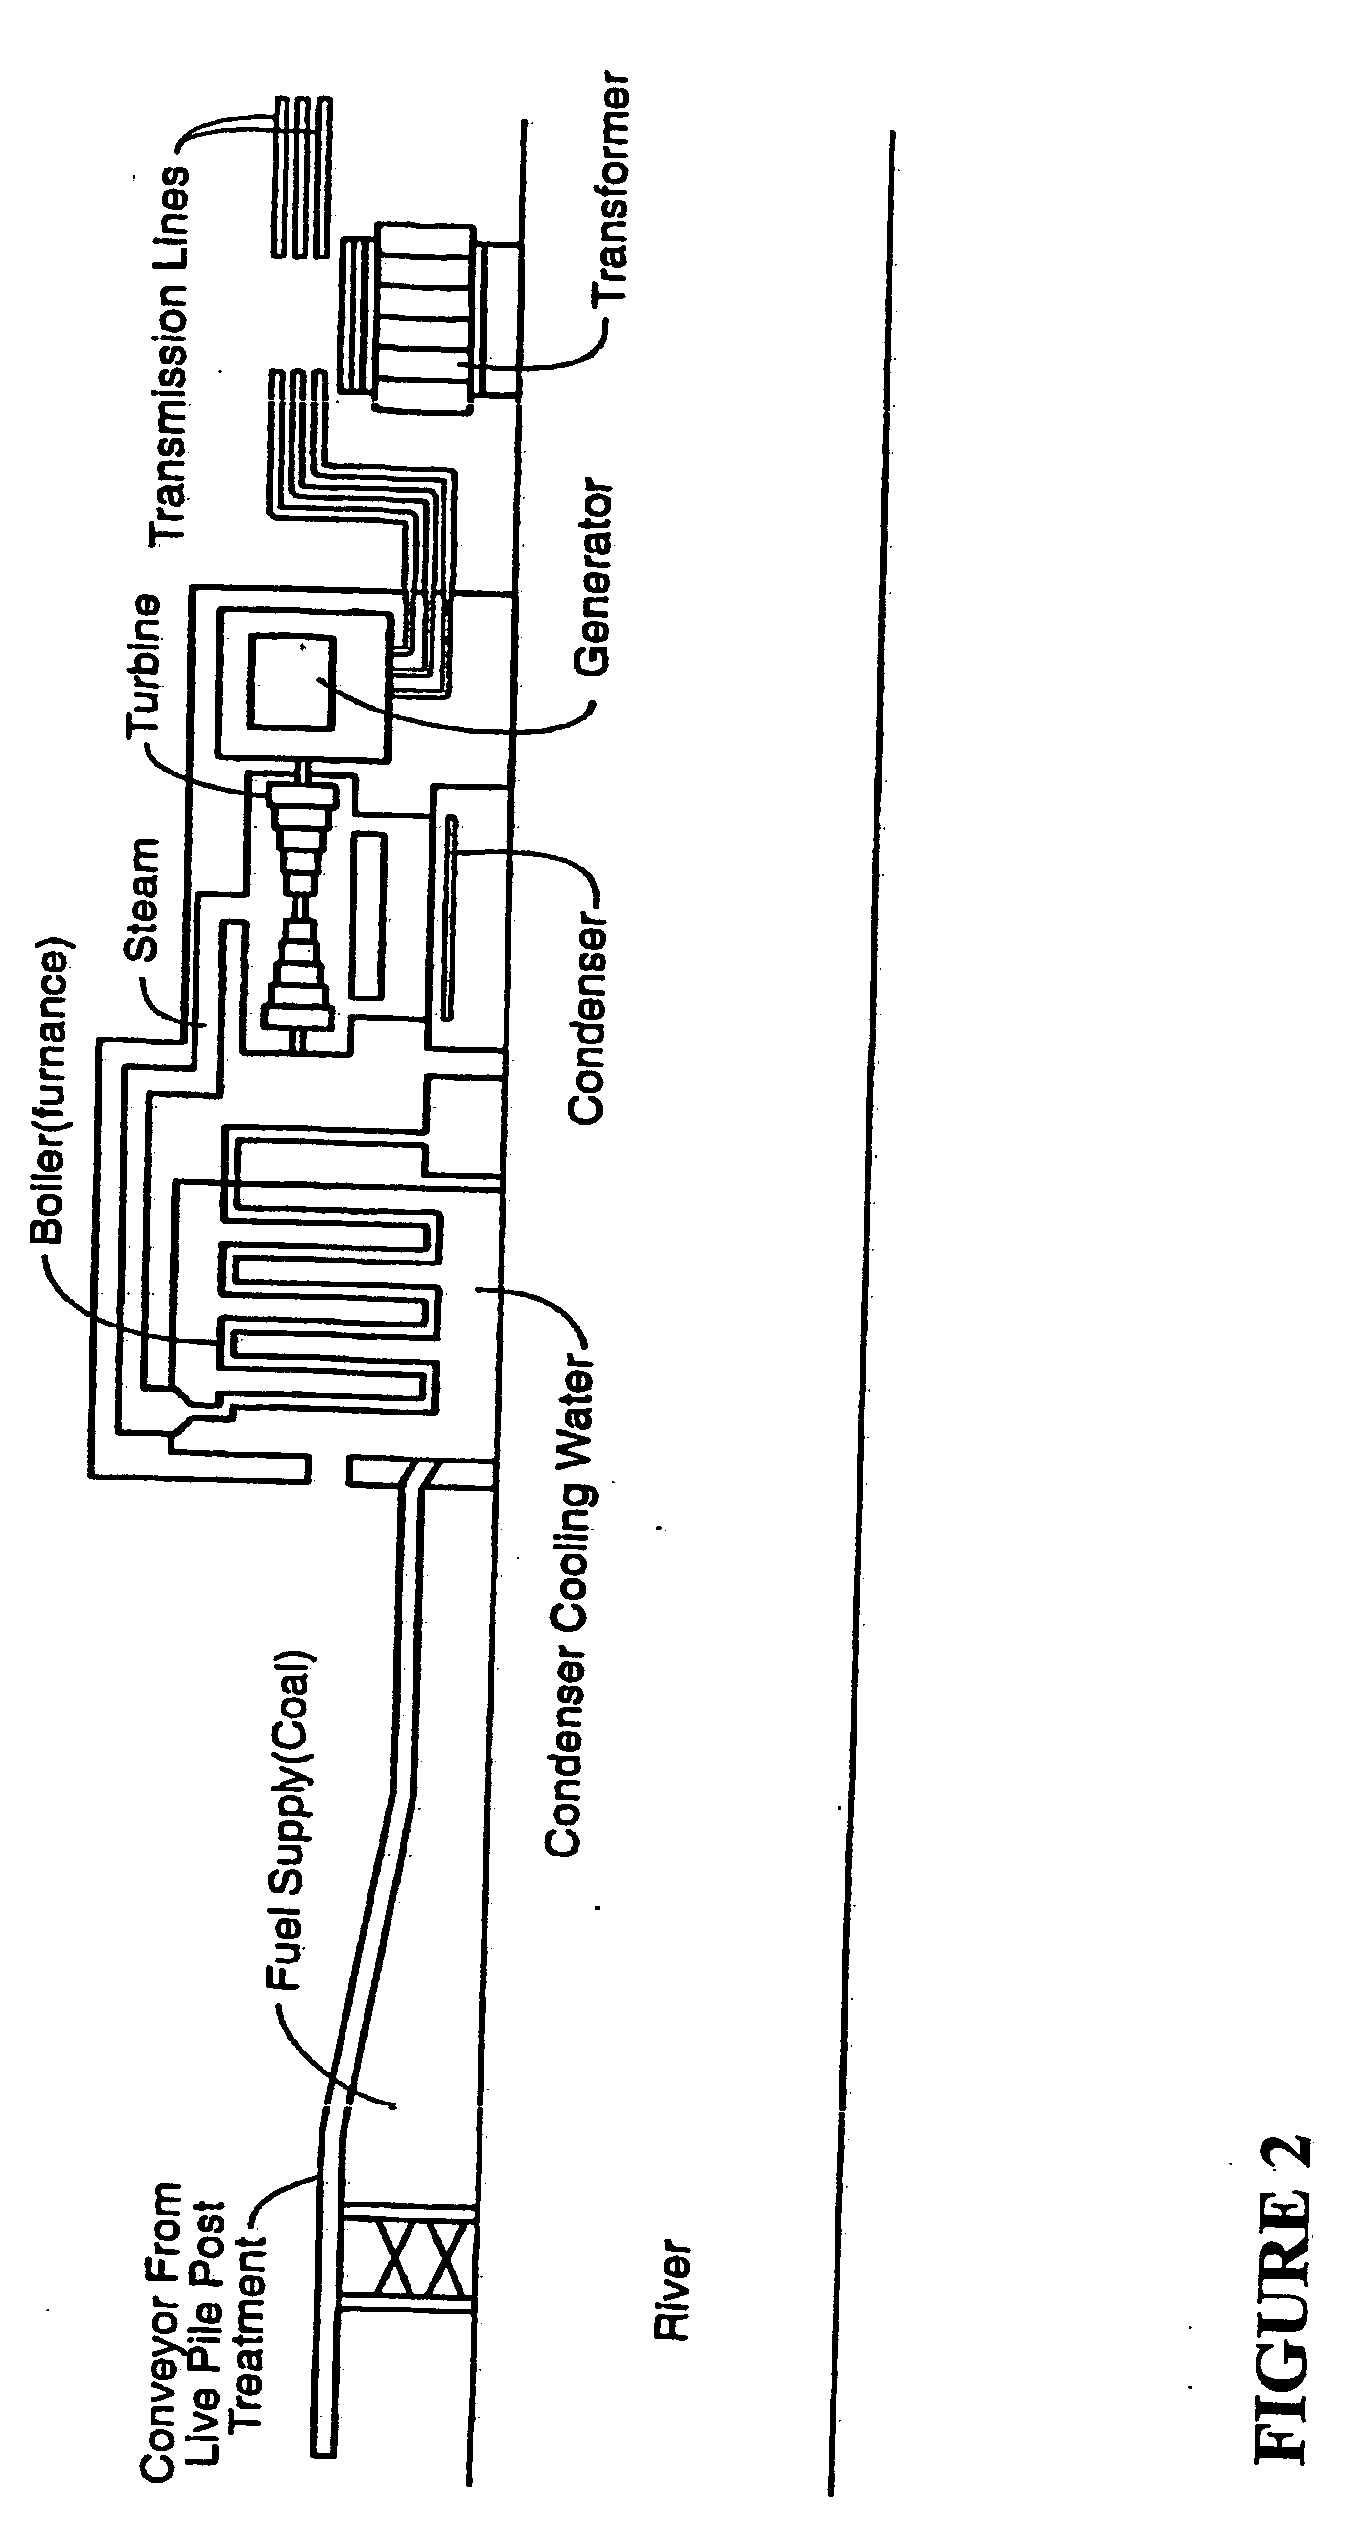 Process for treating coal with a magnetic gradient to reduce sulfur dioxide emissions